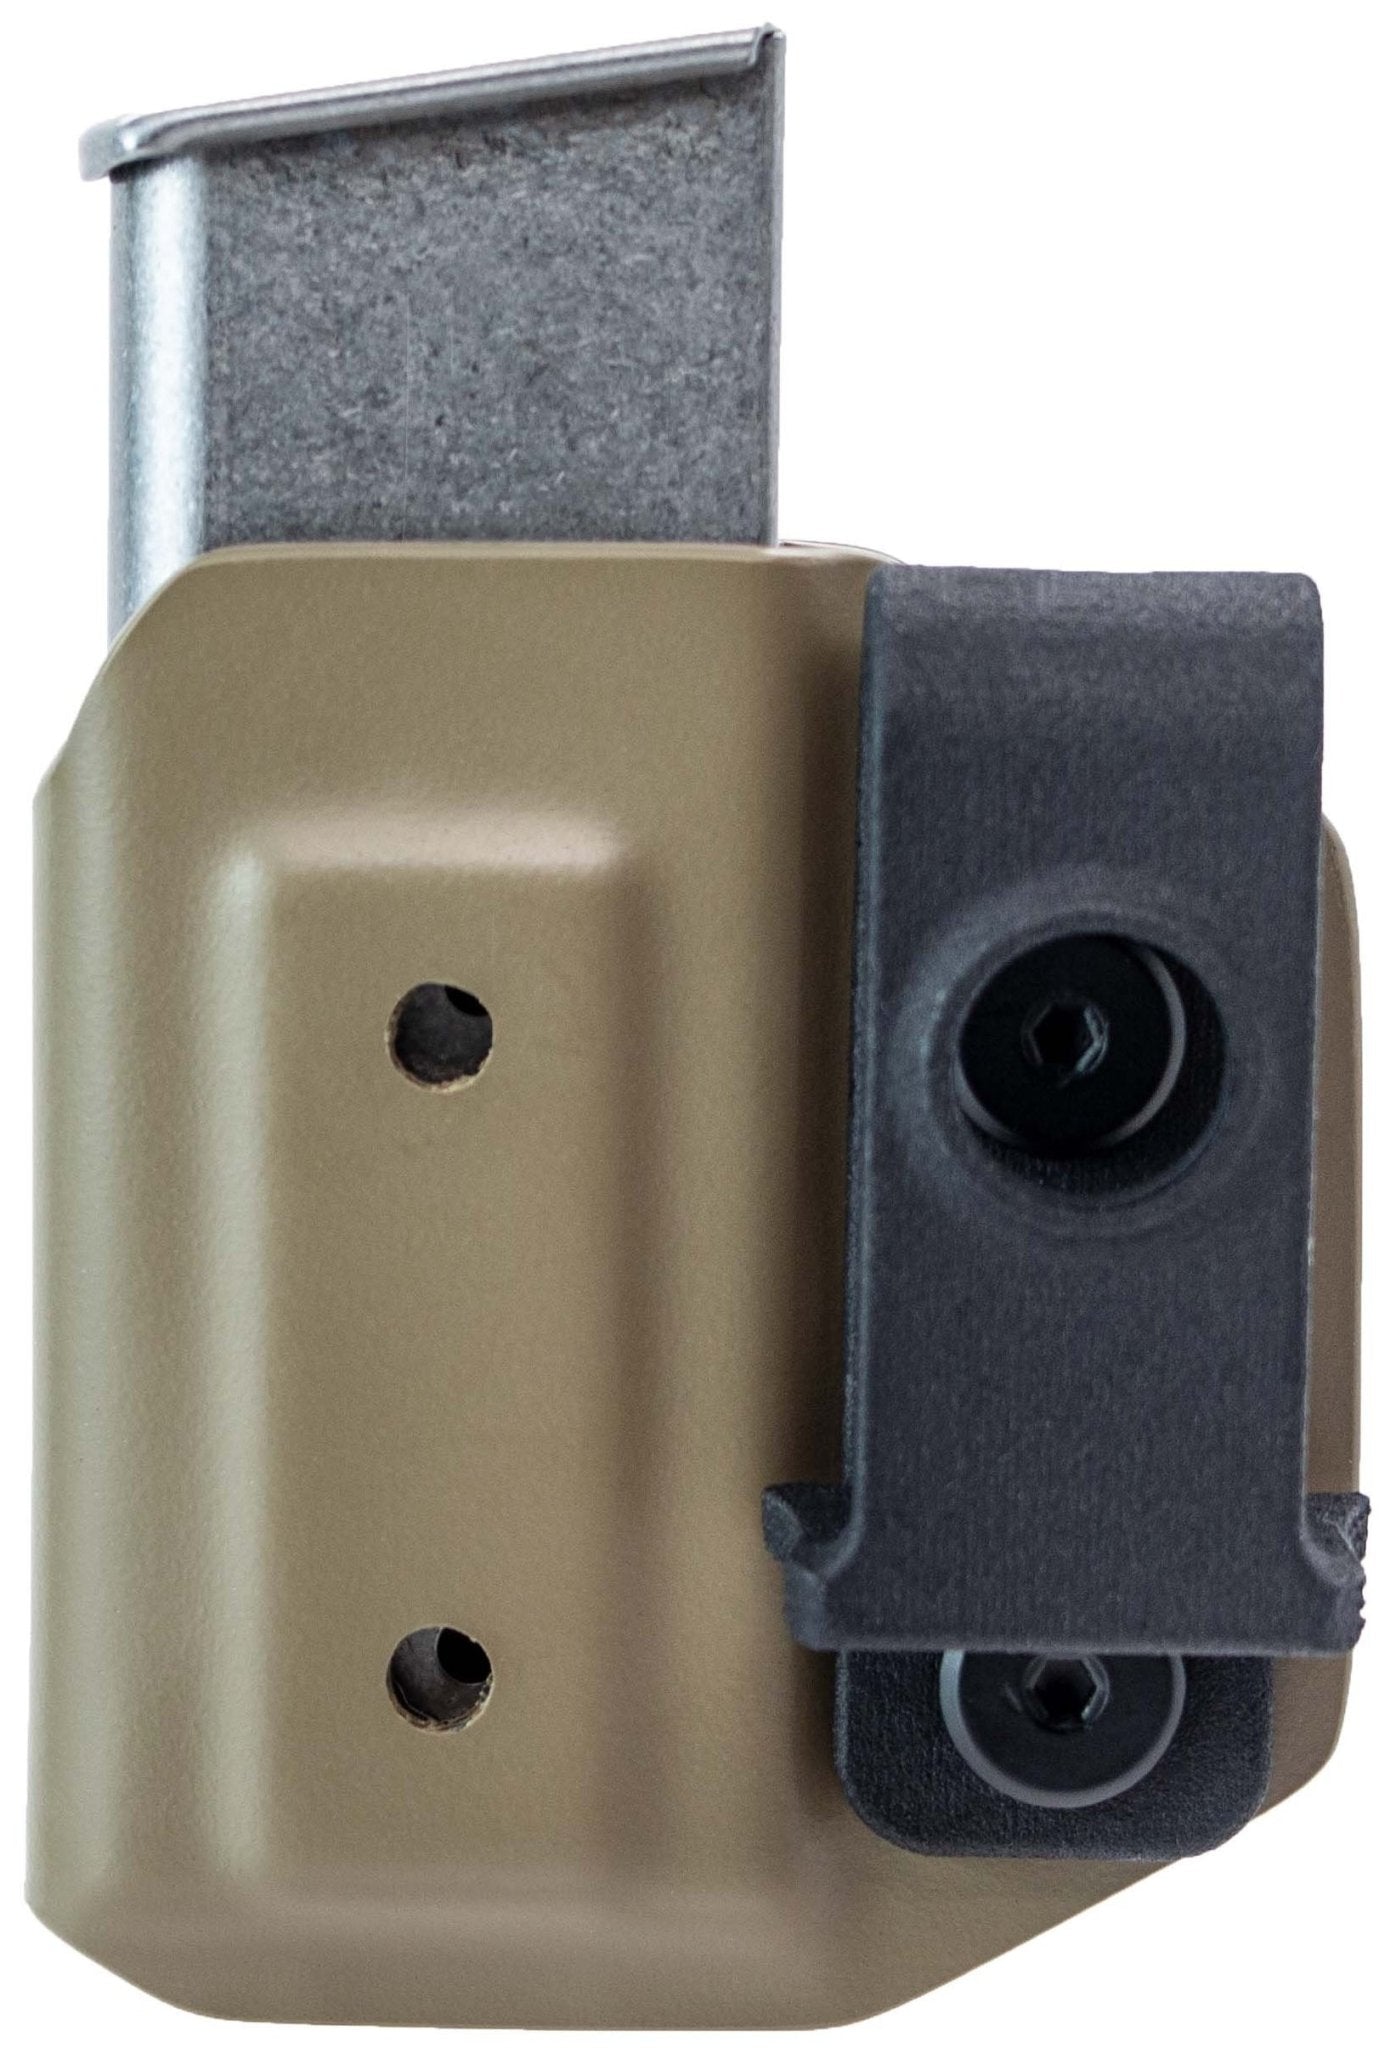 Mag Carrier - Small Single Stack 9mm/.40/.357 SIG CYA Supply Co.